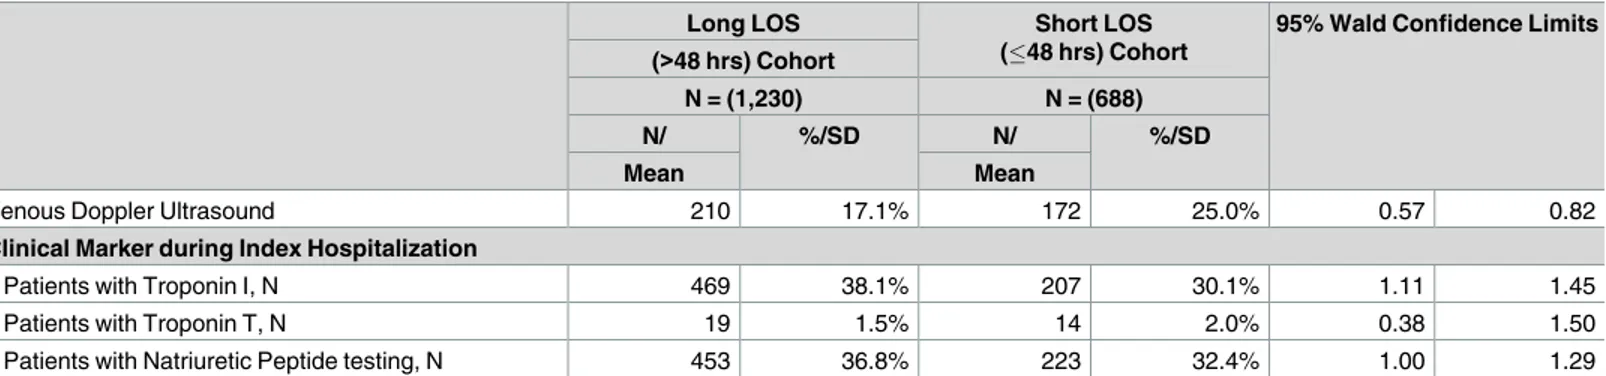 Table 2. PSM-adjusted hospital-acquired complications and adverse PE events among LRPE patients with long versus short LOS during the 90-day follow-up period.